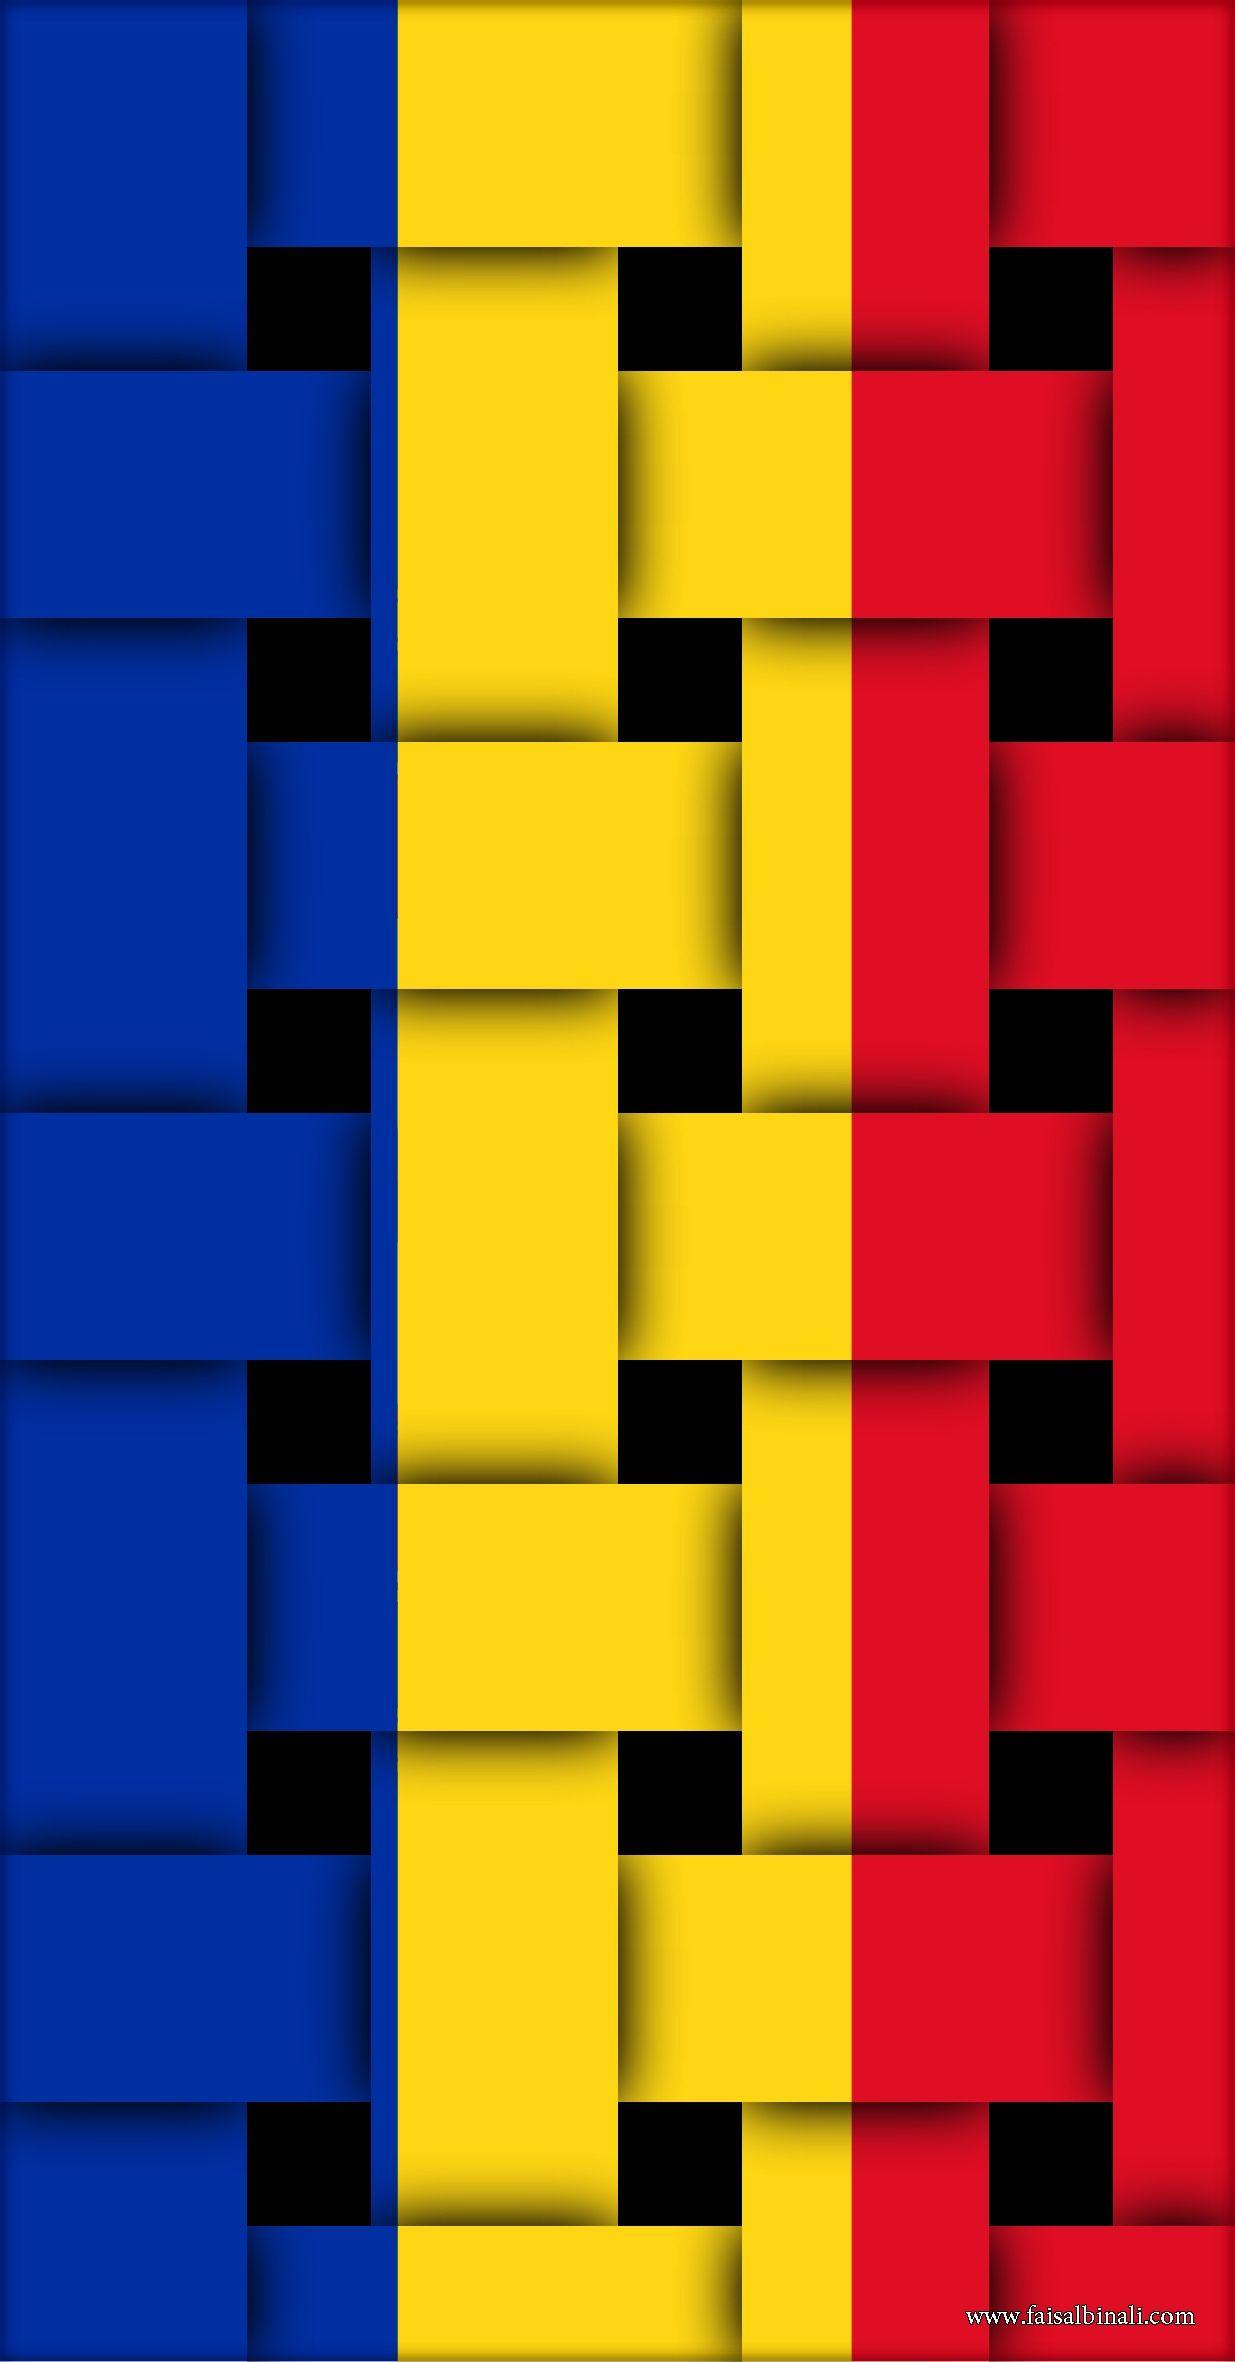 romania #flag #HD #Wallpaper #for #smartphones #and #tablets. Phone wallpaper, Wallpaper s, Romania flag